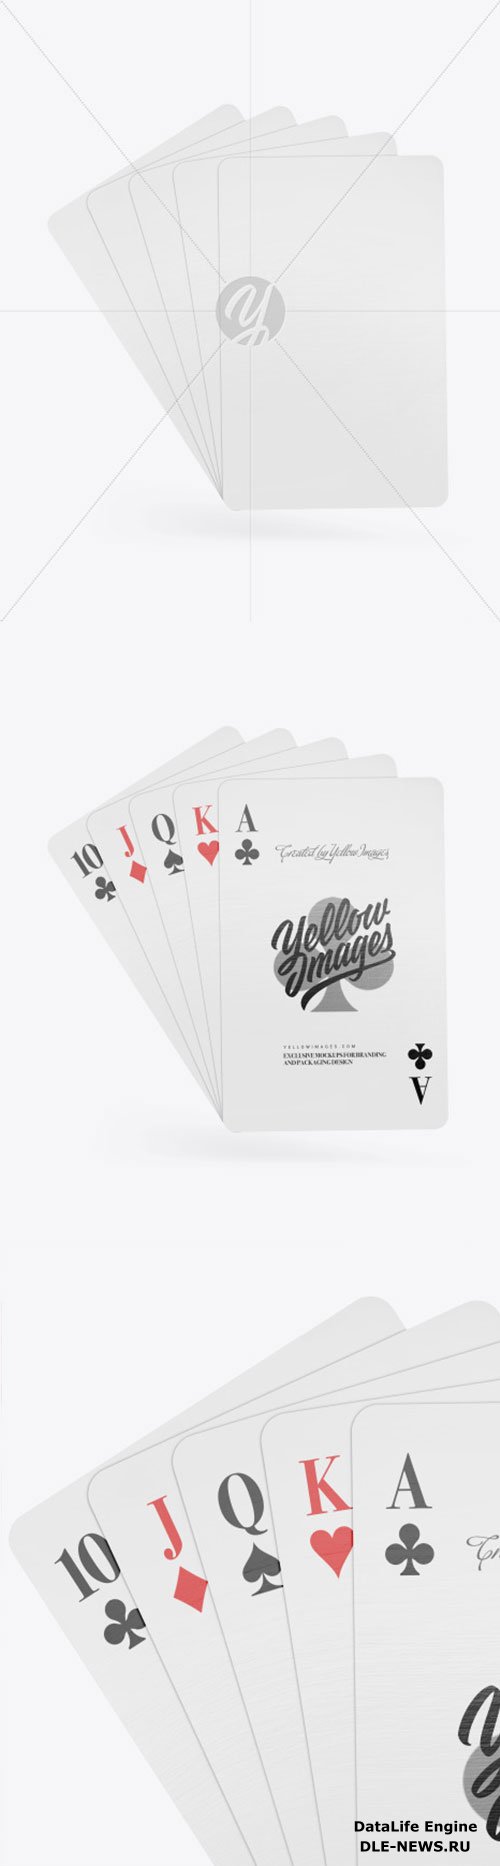 Five Playing Cards Mockup 86452